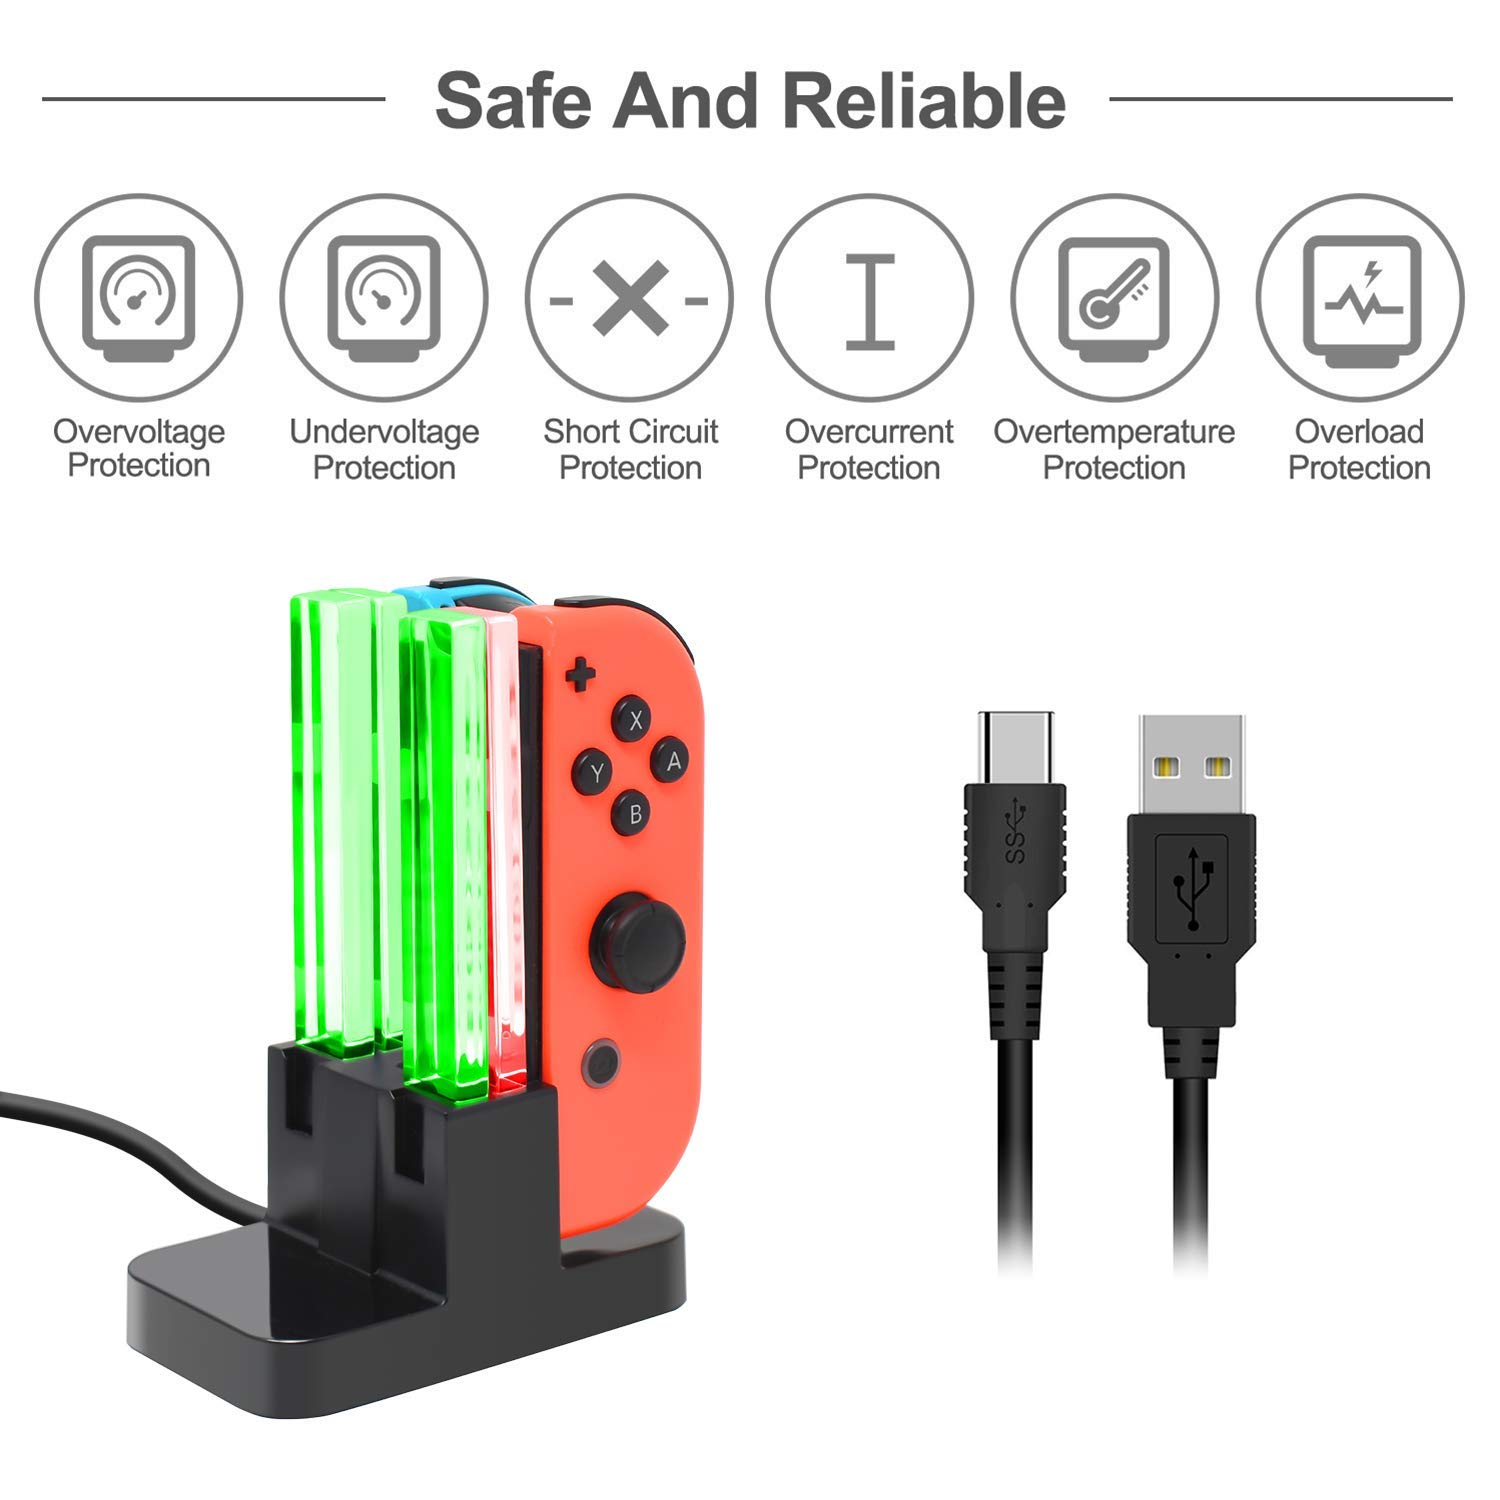 FastSnail Charging Dock Compatible with Nintendo Switch for Joy Con & OLED Model Controller with Lamppost LED Indication, Charger Stand Station with Charging Cable